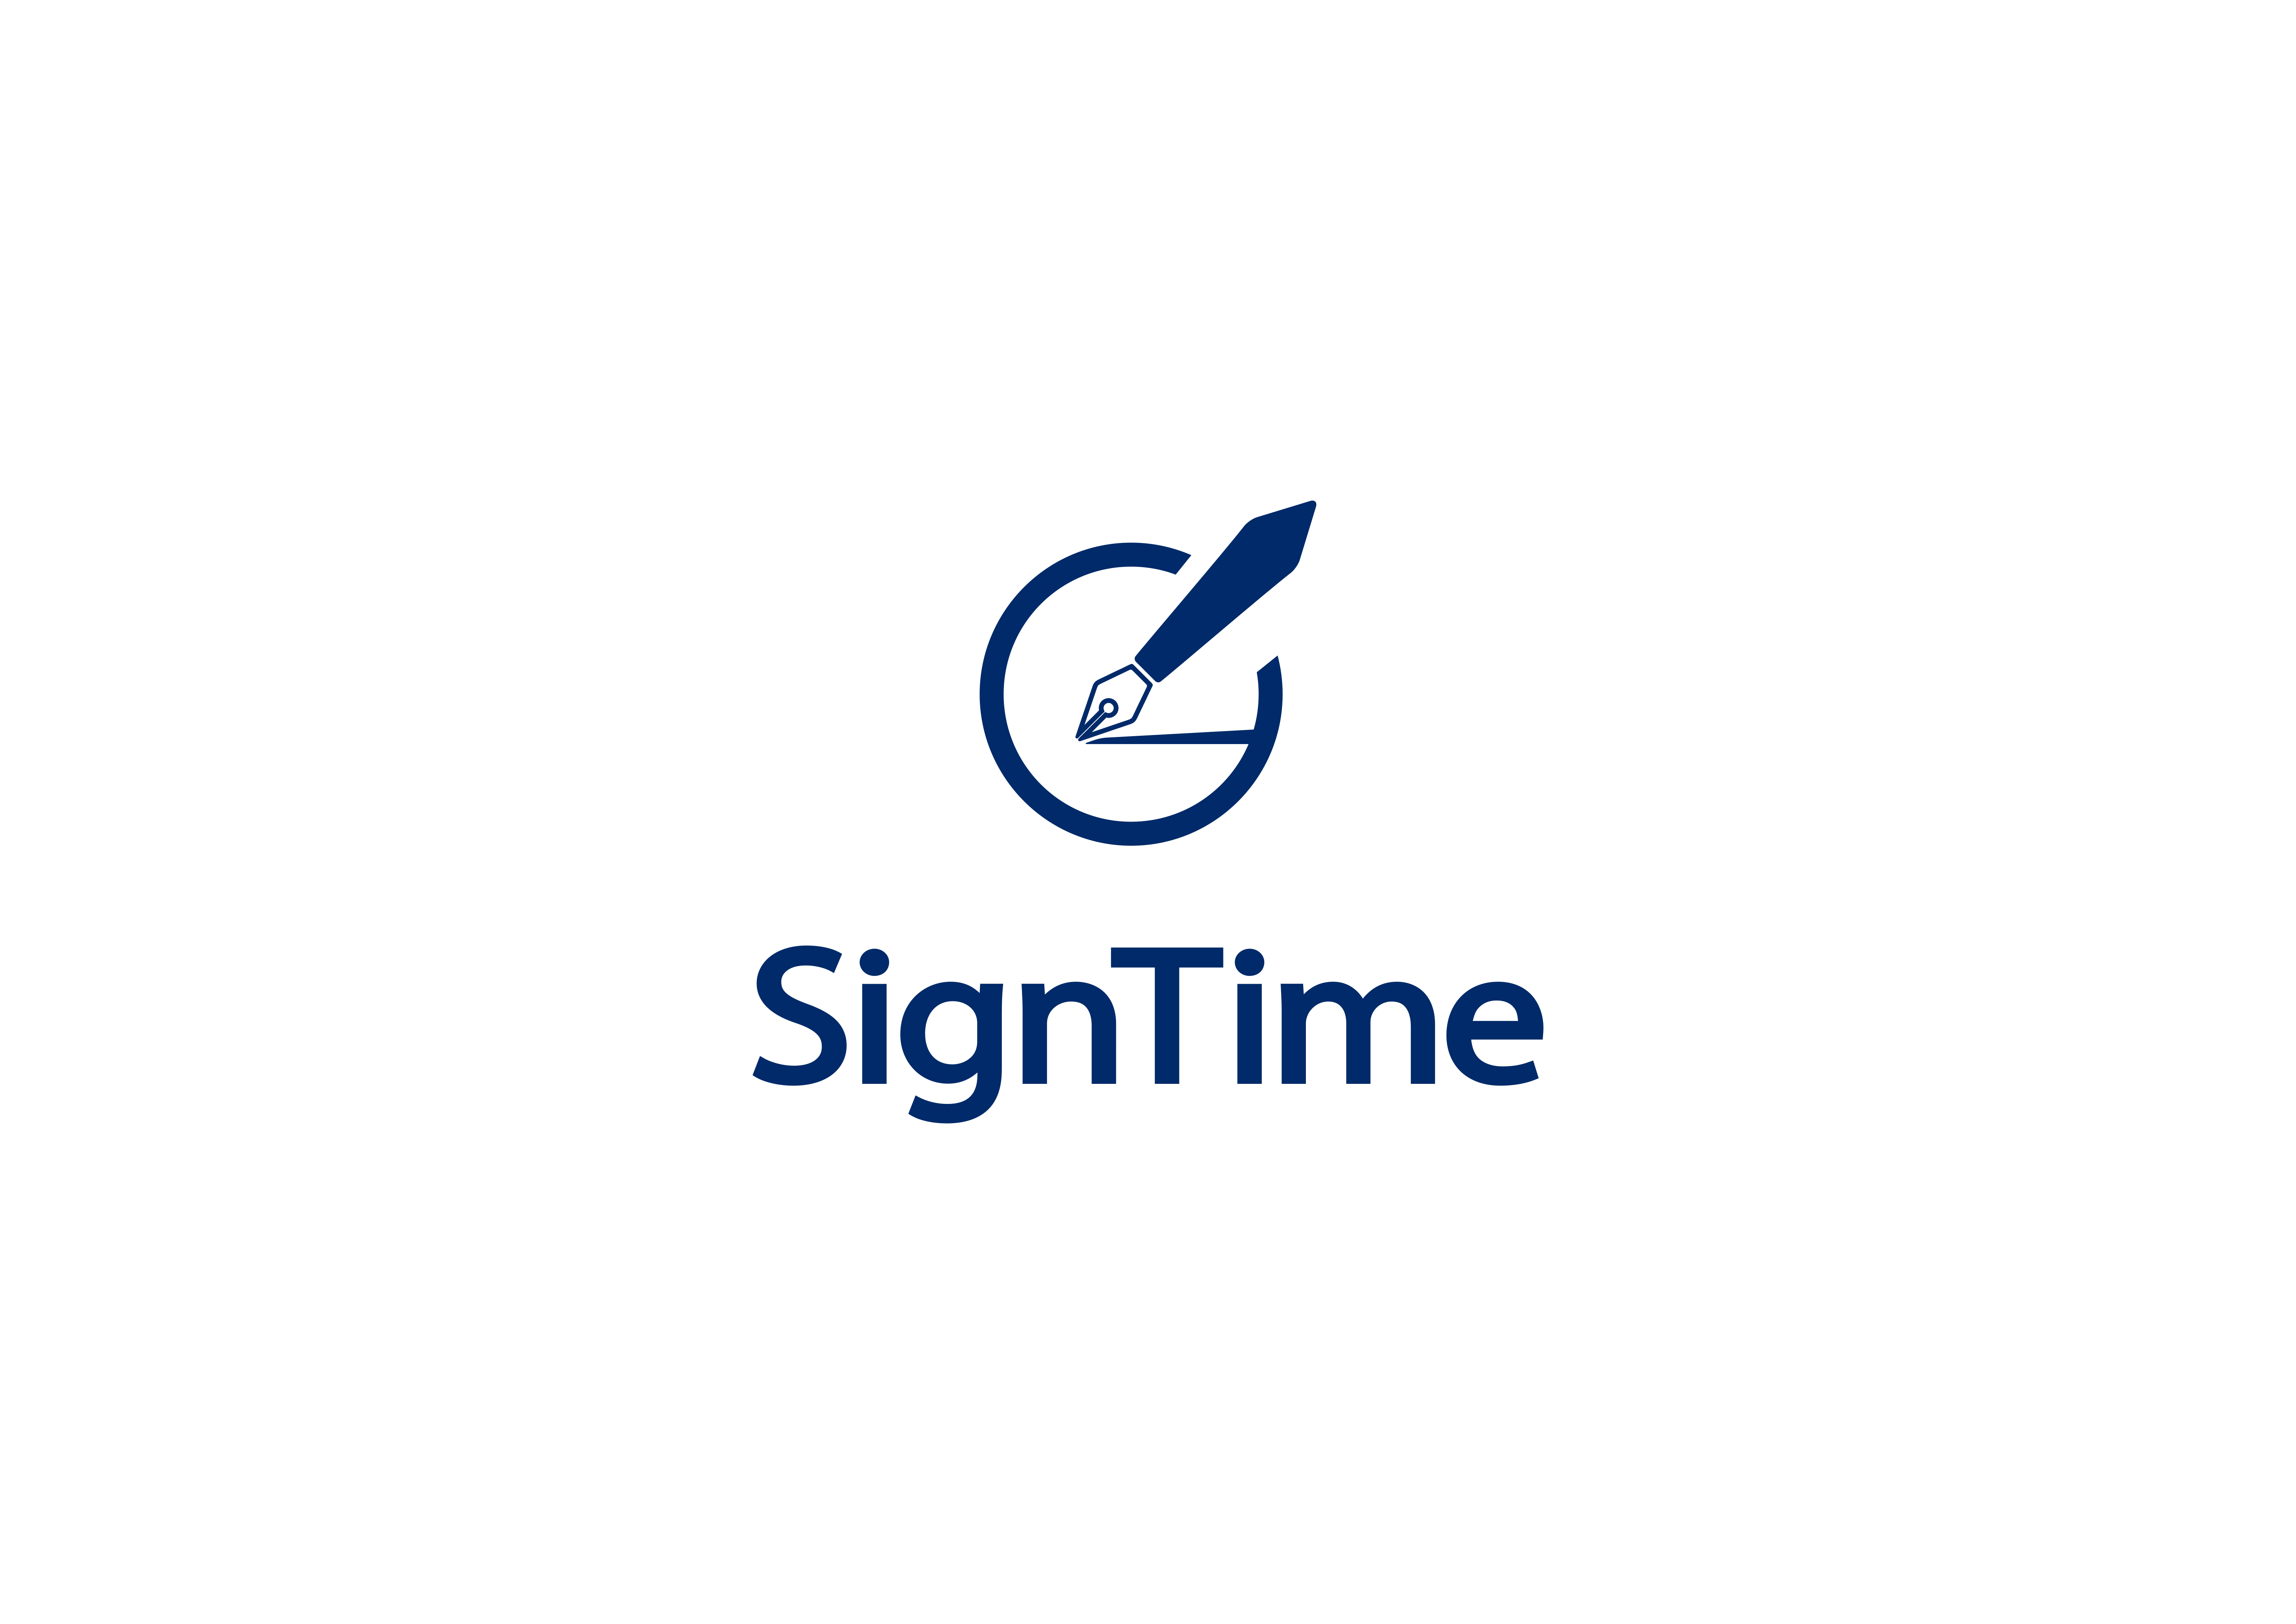 SignTime Announces Appointment of International Advisory Boardのイメージ画像